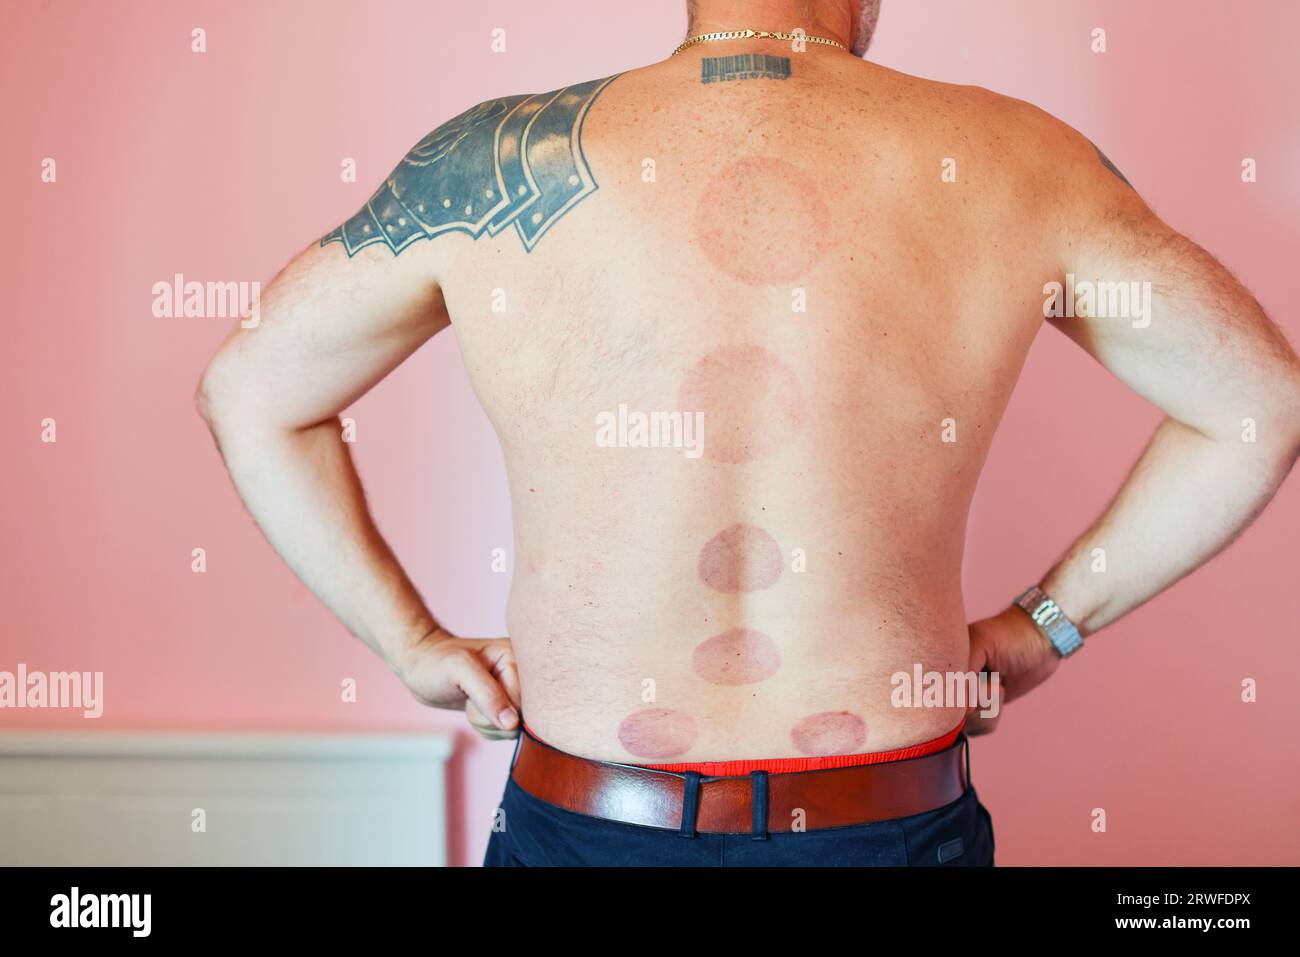 marks on the male back from cupping massage Stock Photo